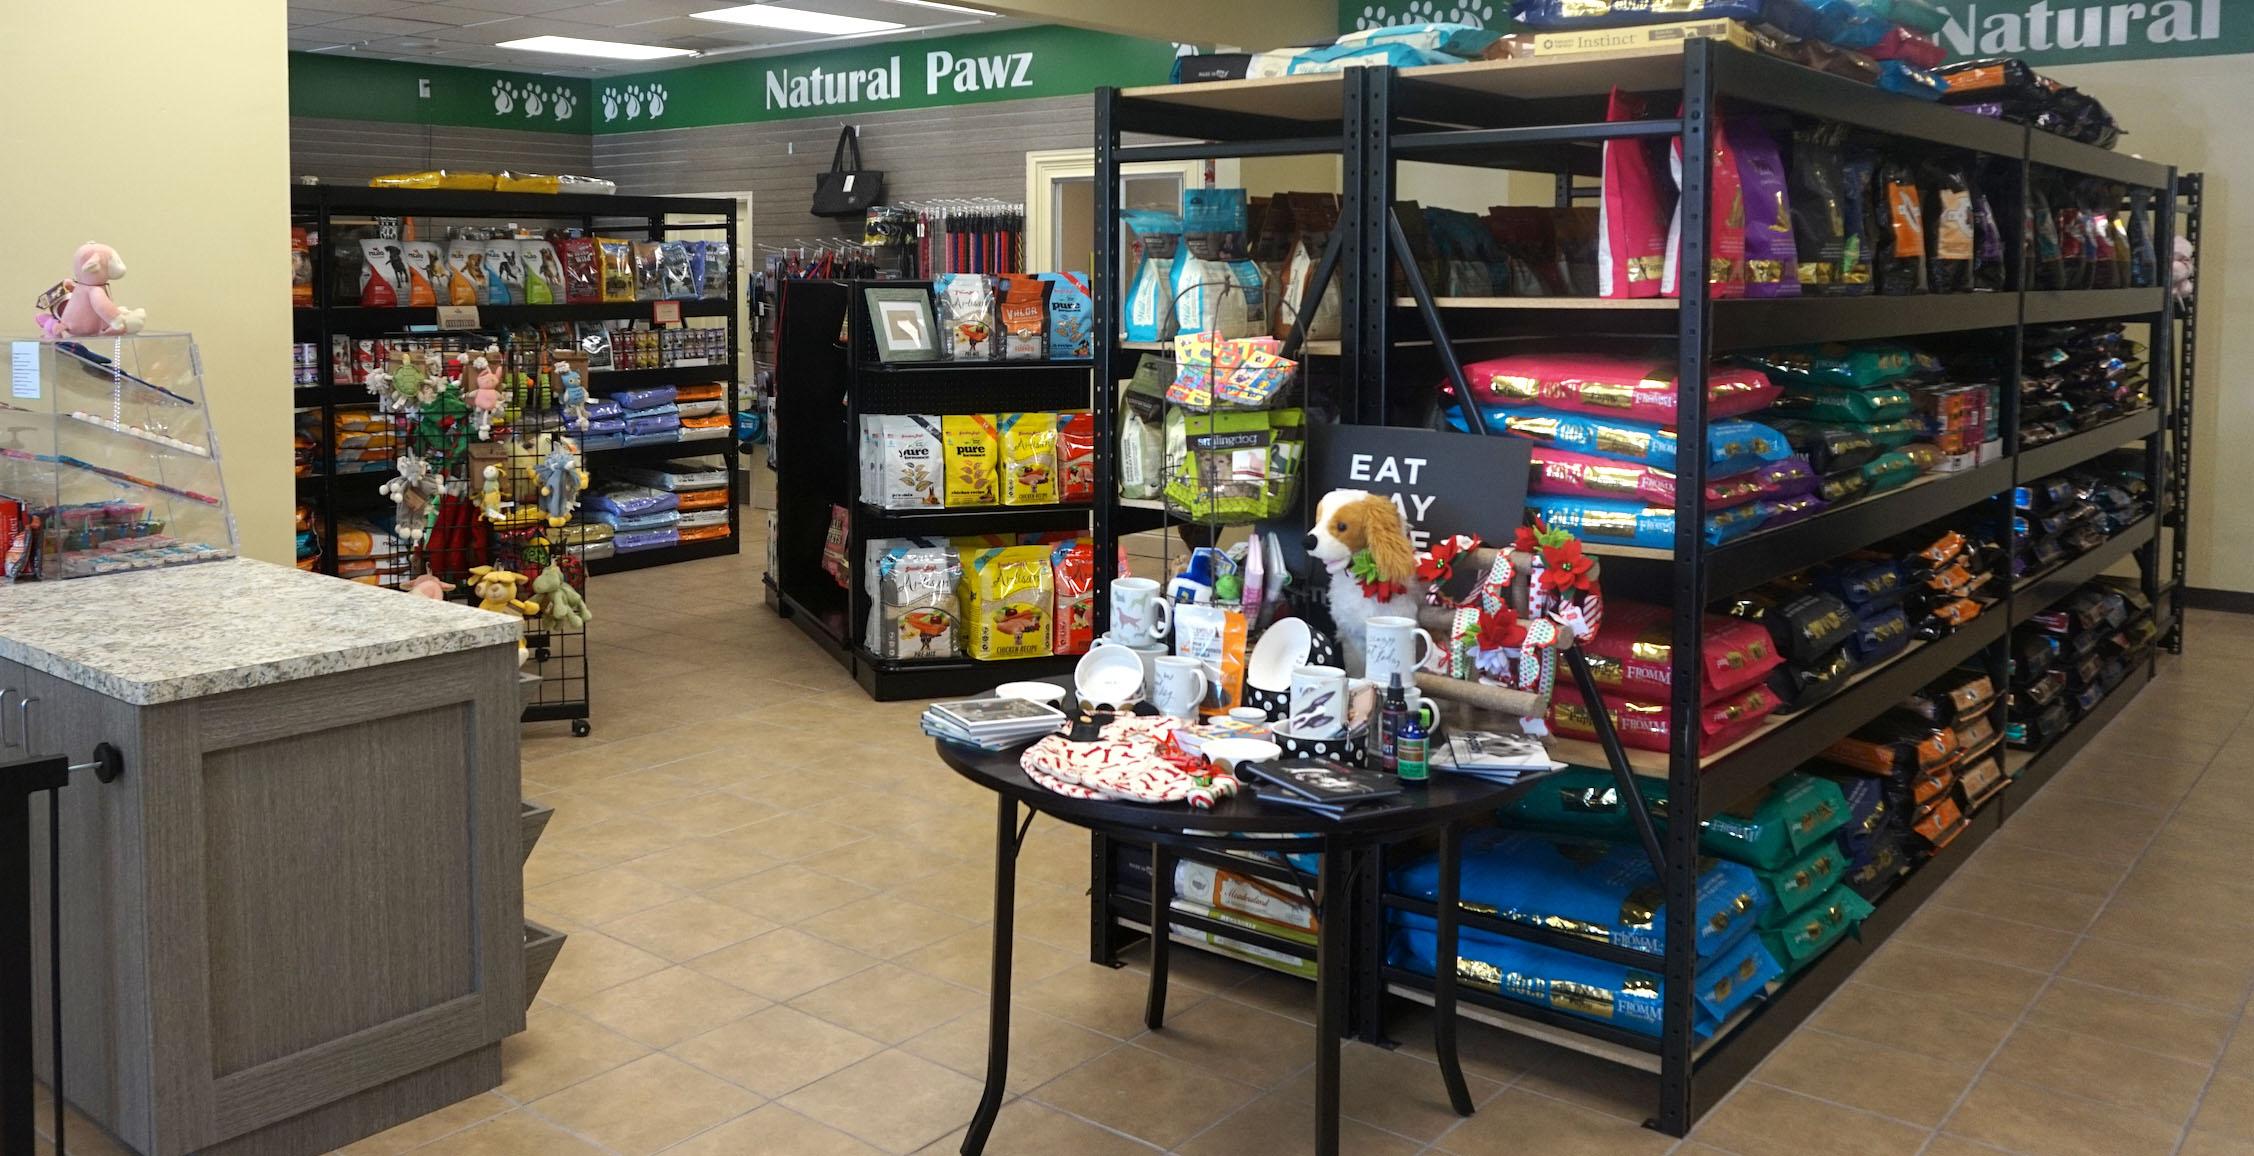 Professional Dog Grooming in Katy, TX » Patsy's Pet Market